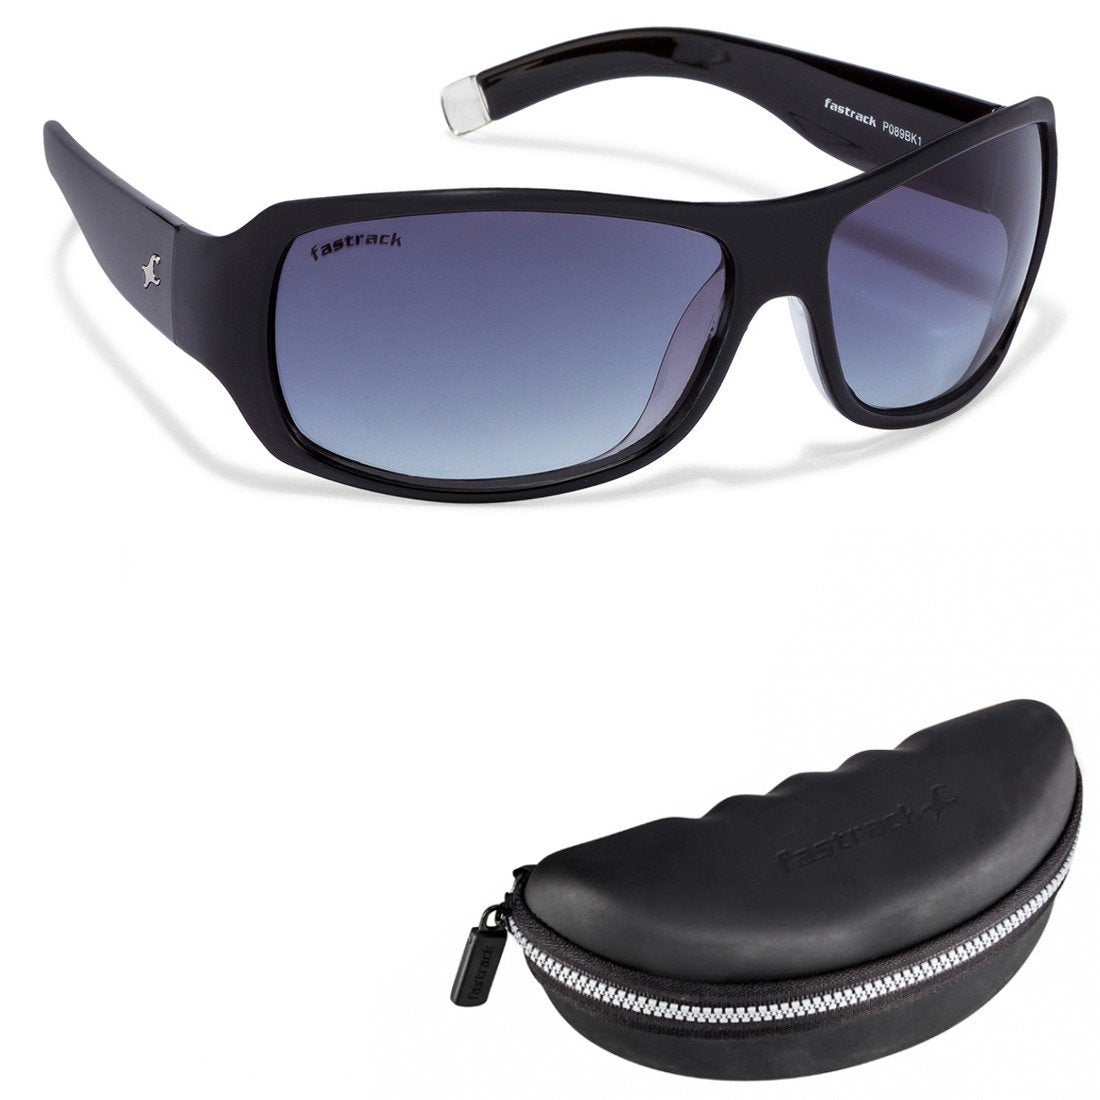 Fastrack (P089BK1 WRAPAROUND Style Full-Rimmed, Black color Sunglasses with Gray colored LENS, For Men & Women 